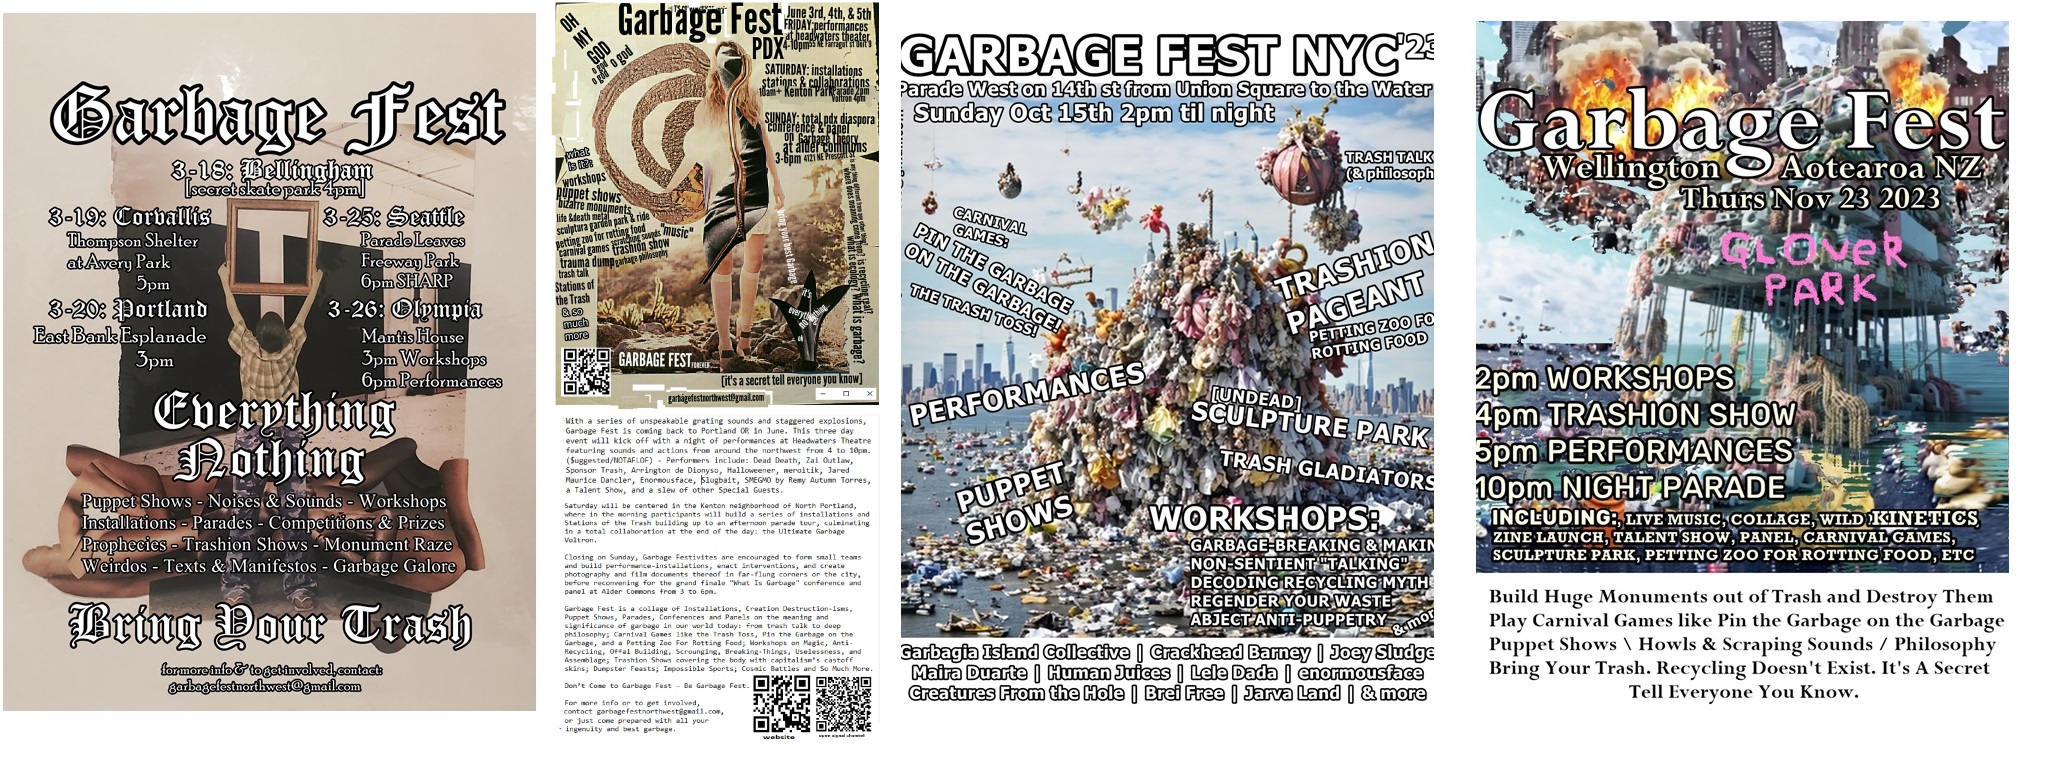 posters for garbage fest from around the world